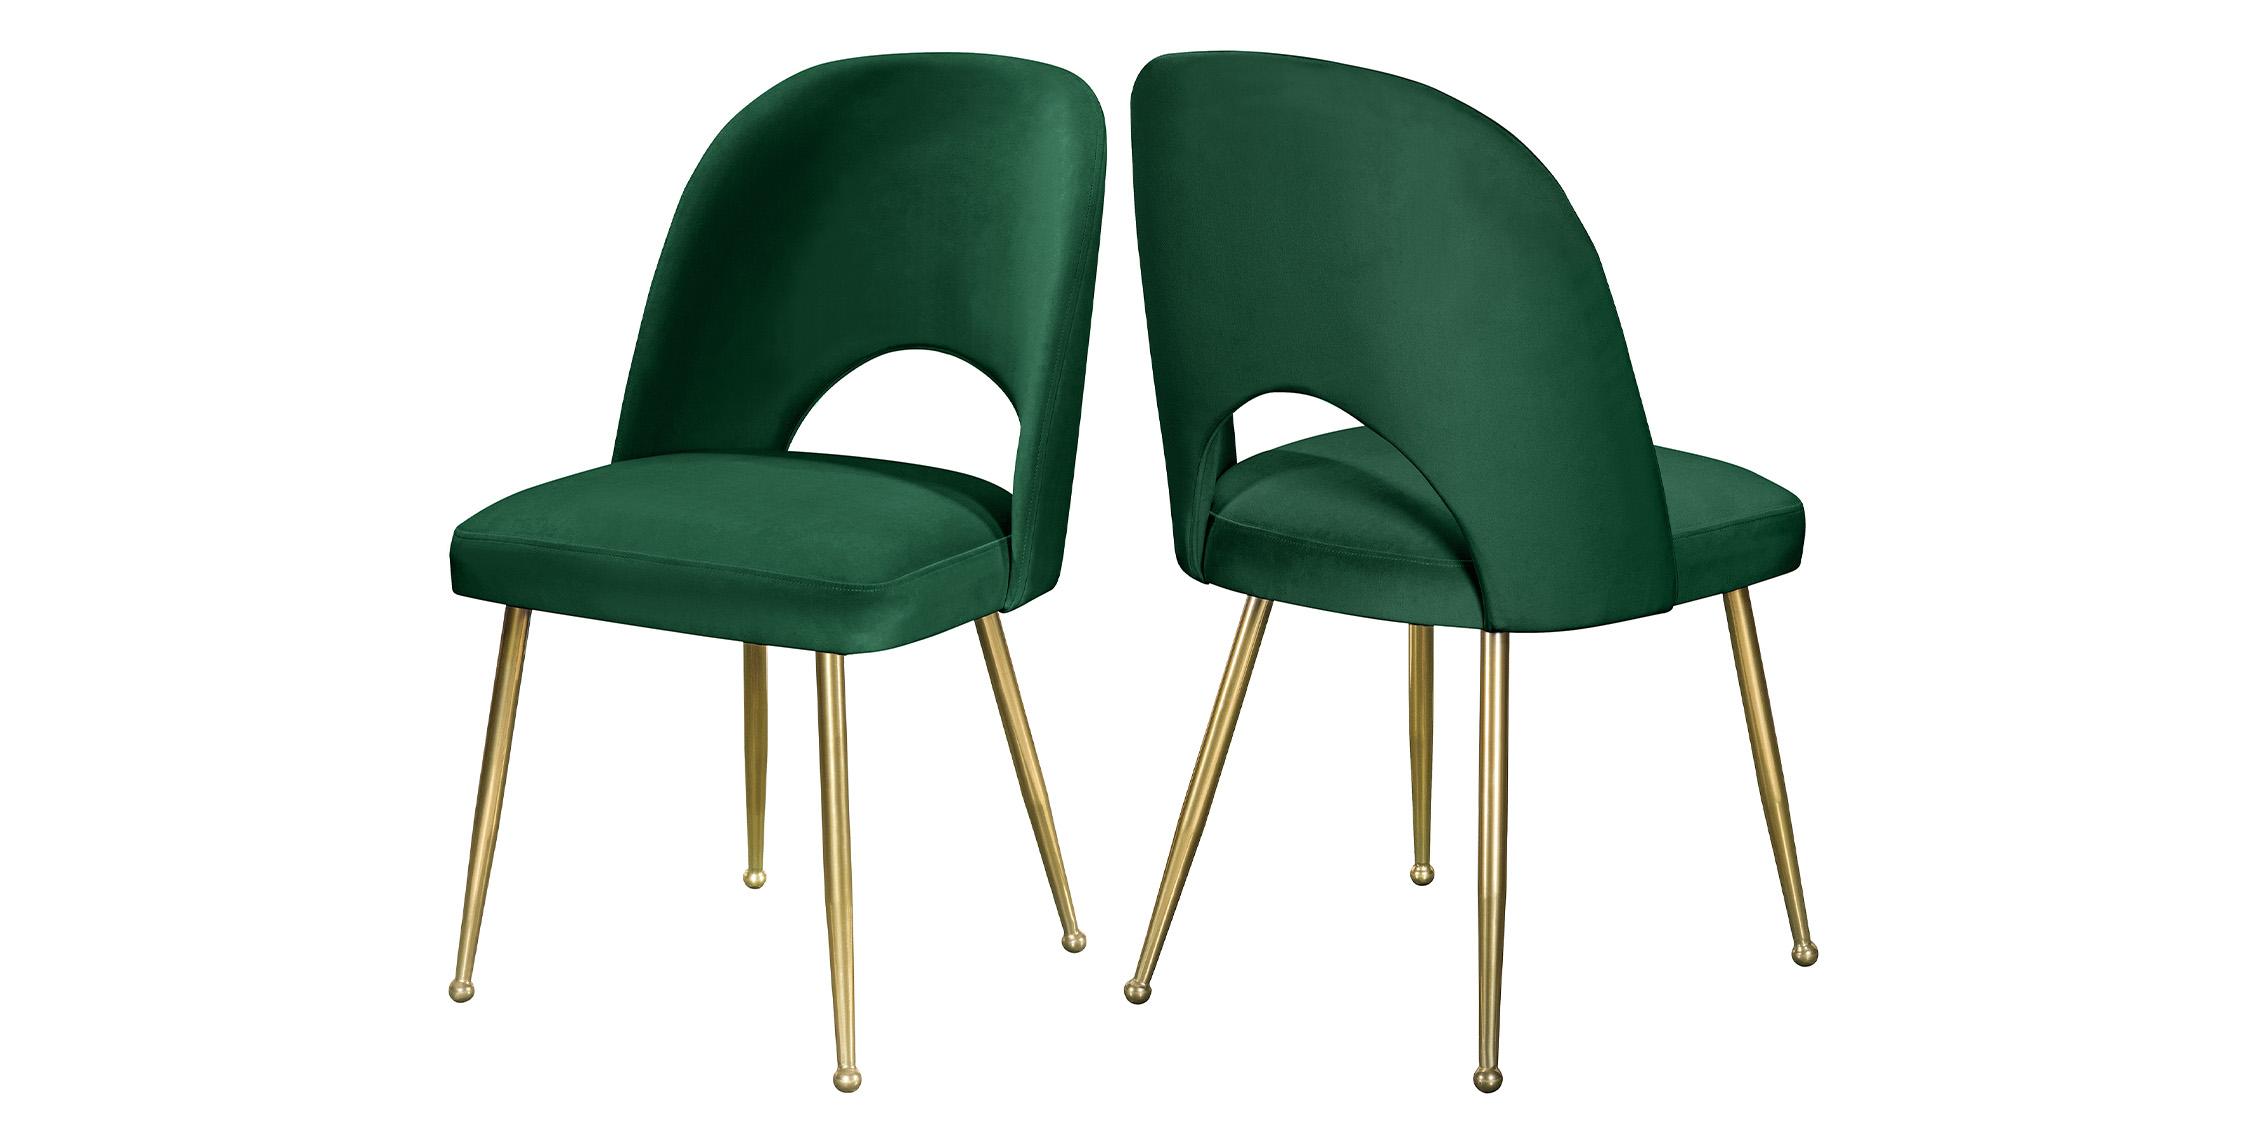 Contemporary, Modern Dining Chair Set LOGAN 990Green-C 990Green-C in Green, Gold Fabric